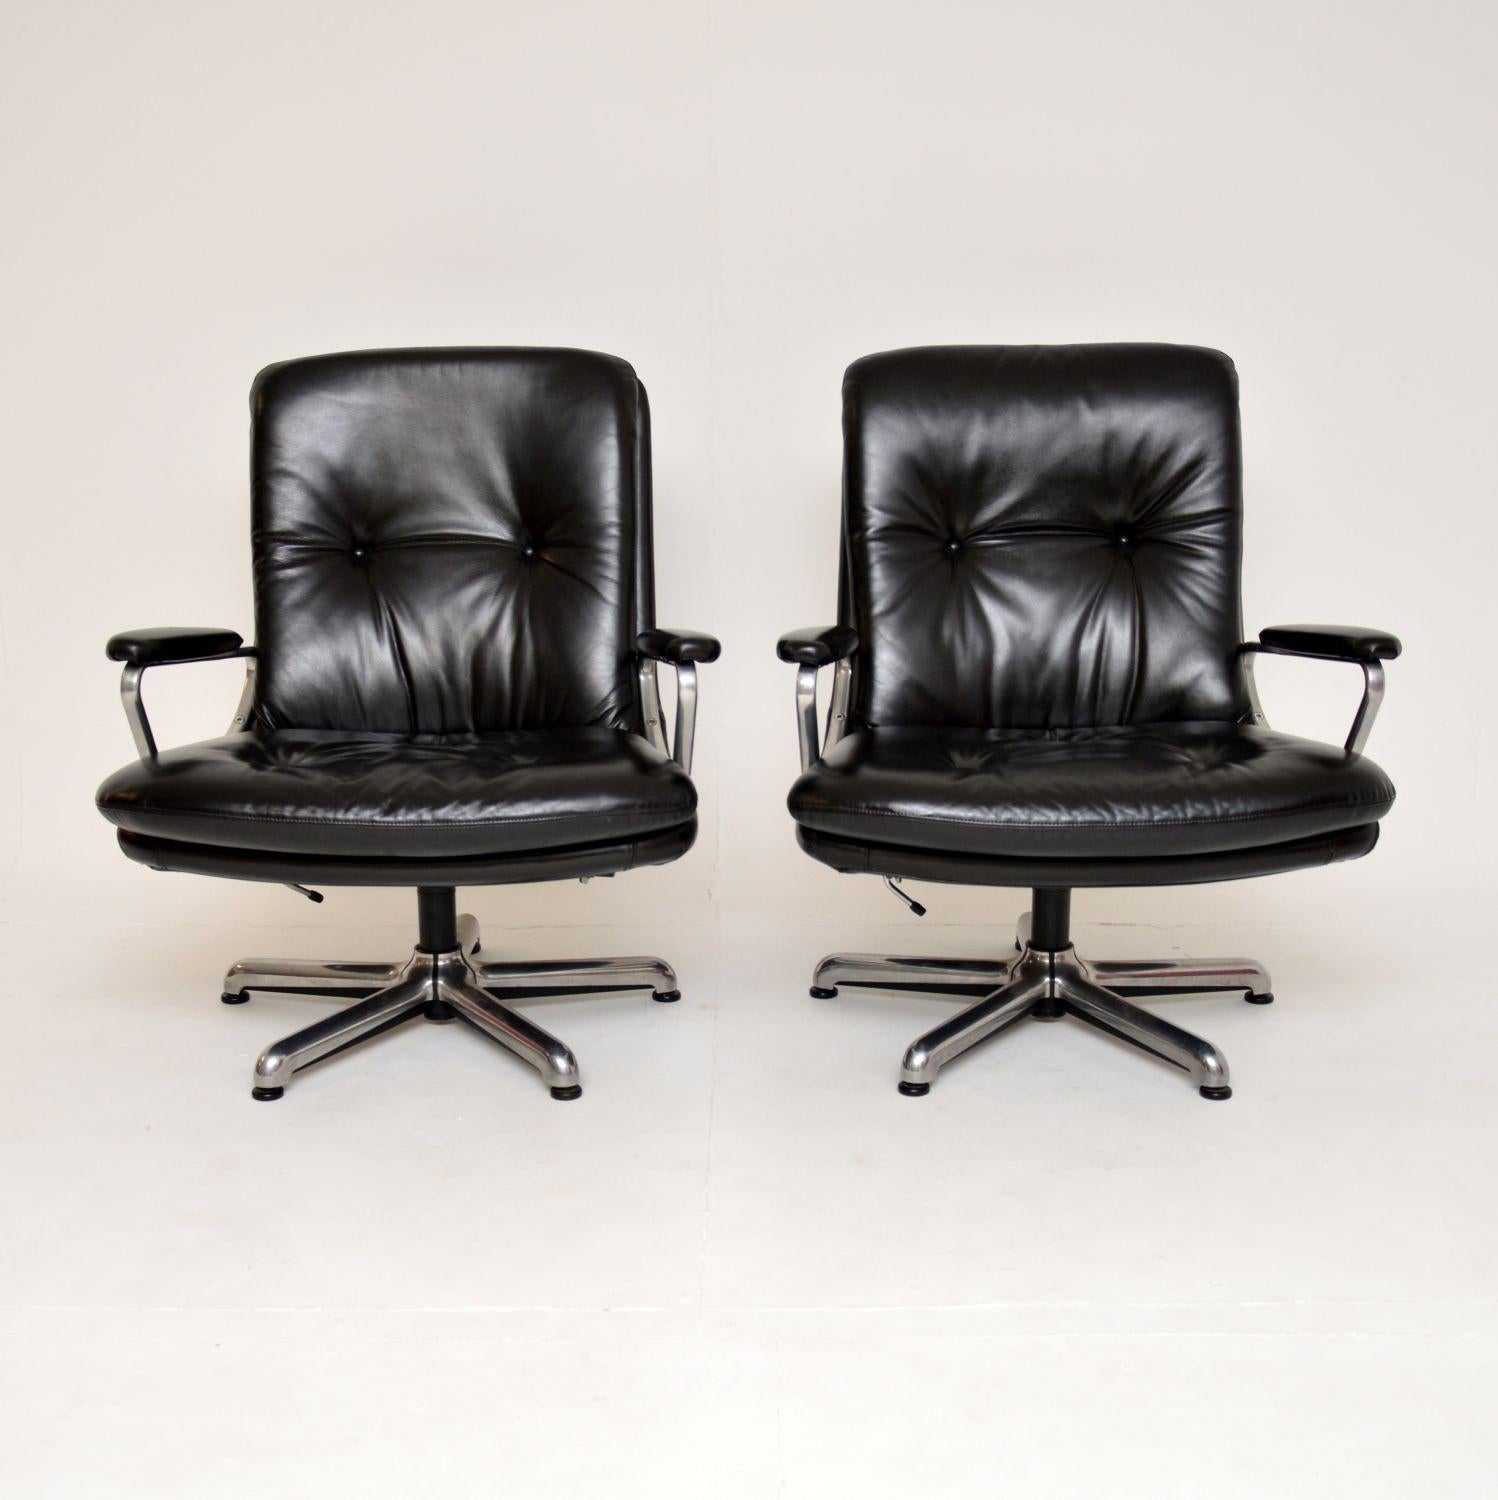 A superb pair of vintage leather and chrome swivel armchairs. They were made in Sweden in the 1960’s by Strassle, and were designed by Andre Vandenbeuk.

The quality is exceptional and they are extremely comfortable. They swivel on splayed chrome